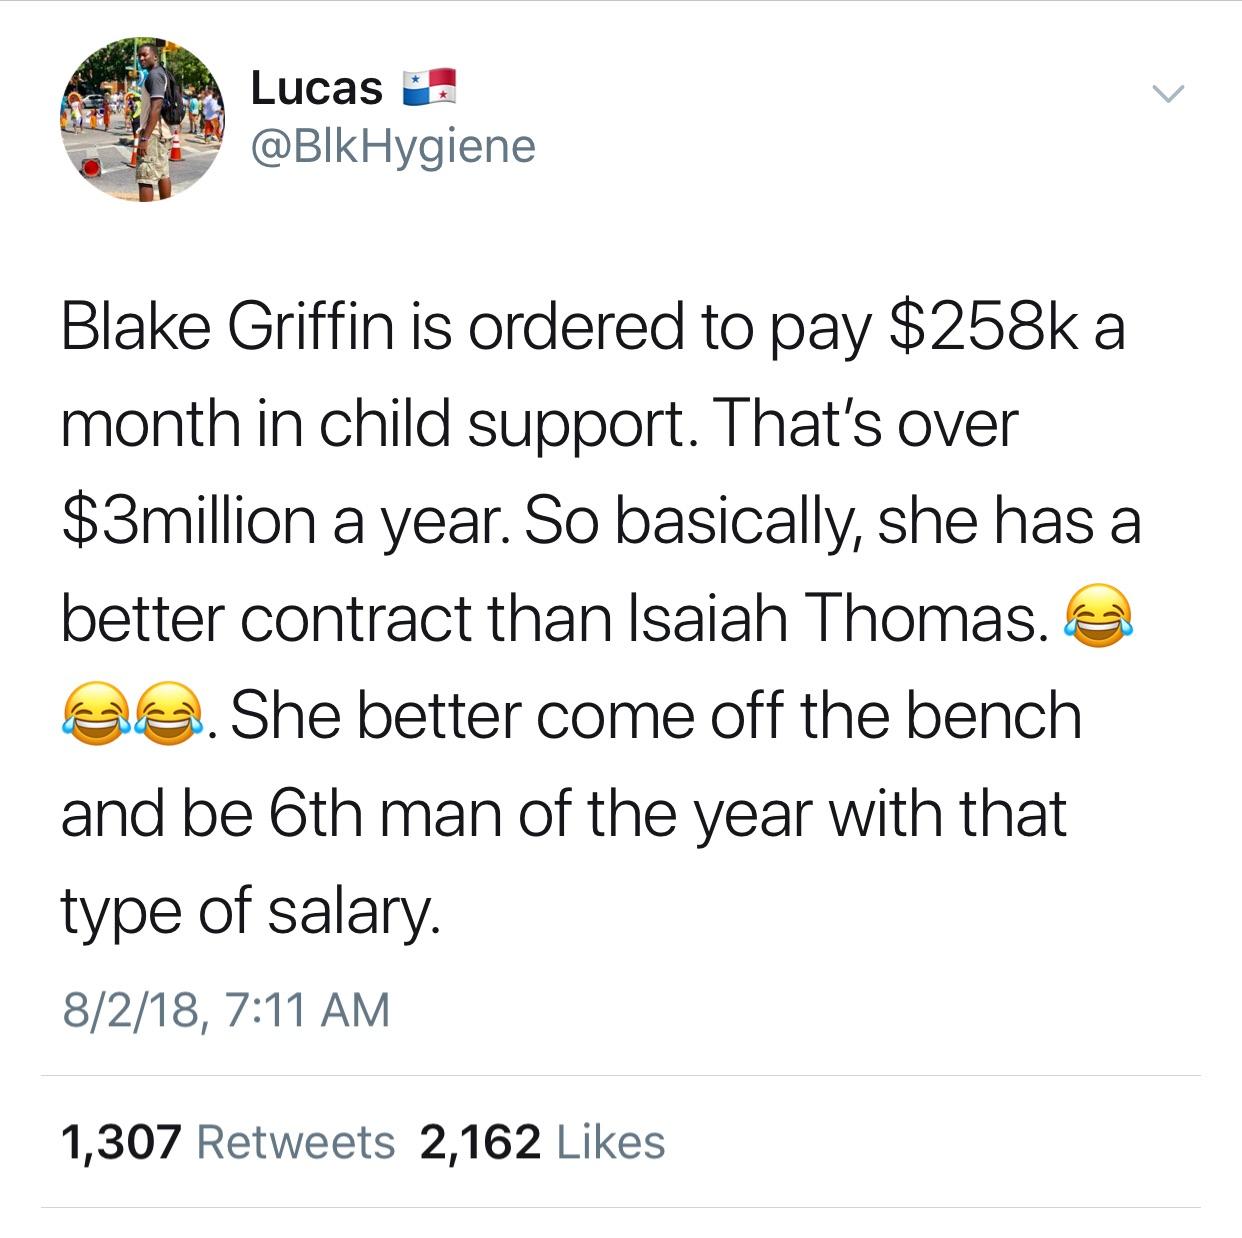 #metoo tweets - Lucas Blake Griffin is ordered to pay $ a month in child support. That's over $3million a year. So basically, she has a better contract than Isaiah Thomas. a. She better come off the bench and be 6th man of the year with that type of salar